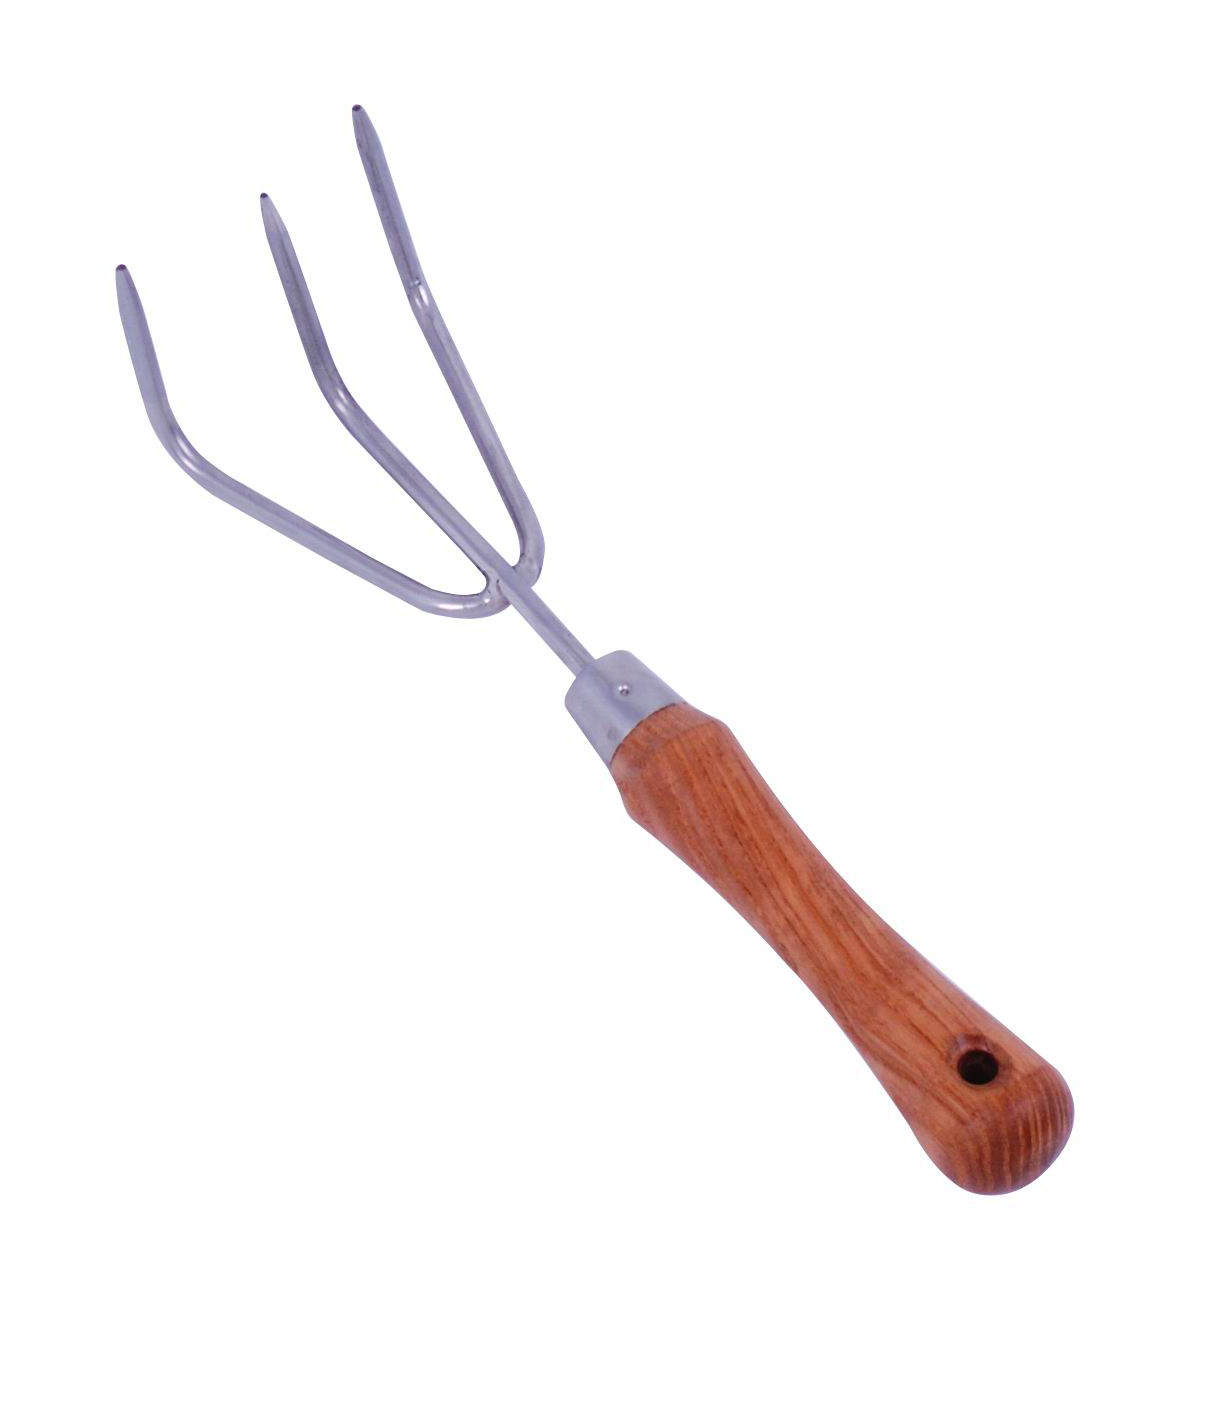  Stainless Steel Cultivator with Ash Wood Handle (Stainless Steel Cultivateur avec Ash Manche Bois)